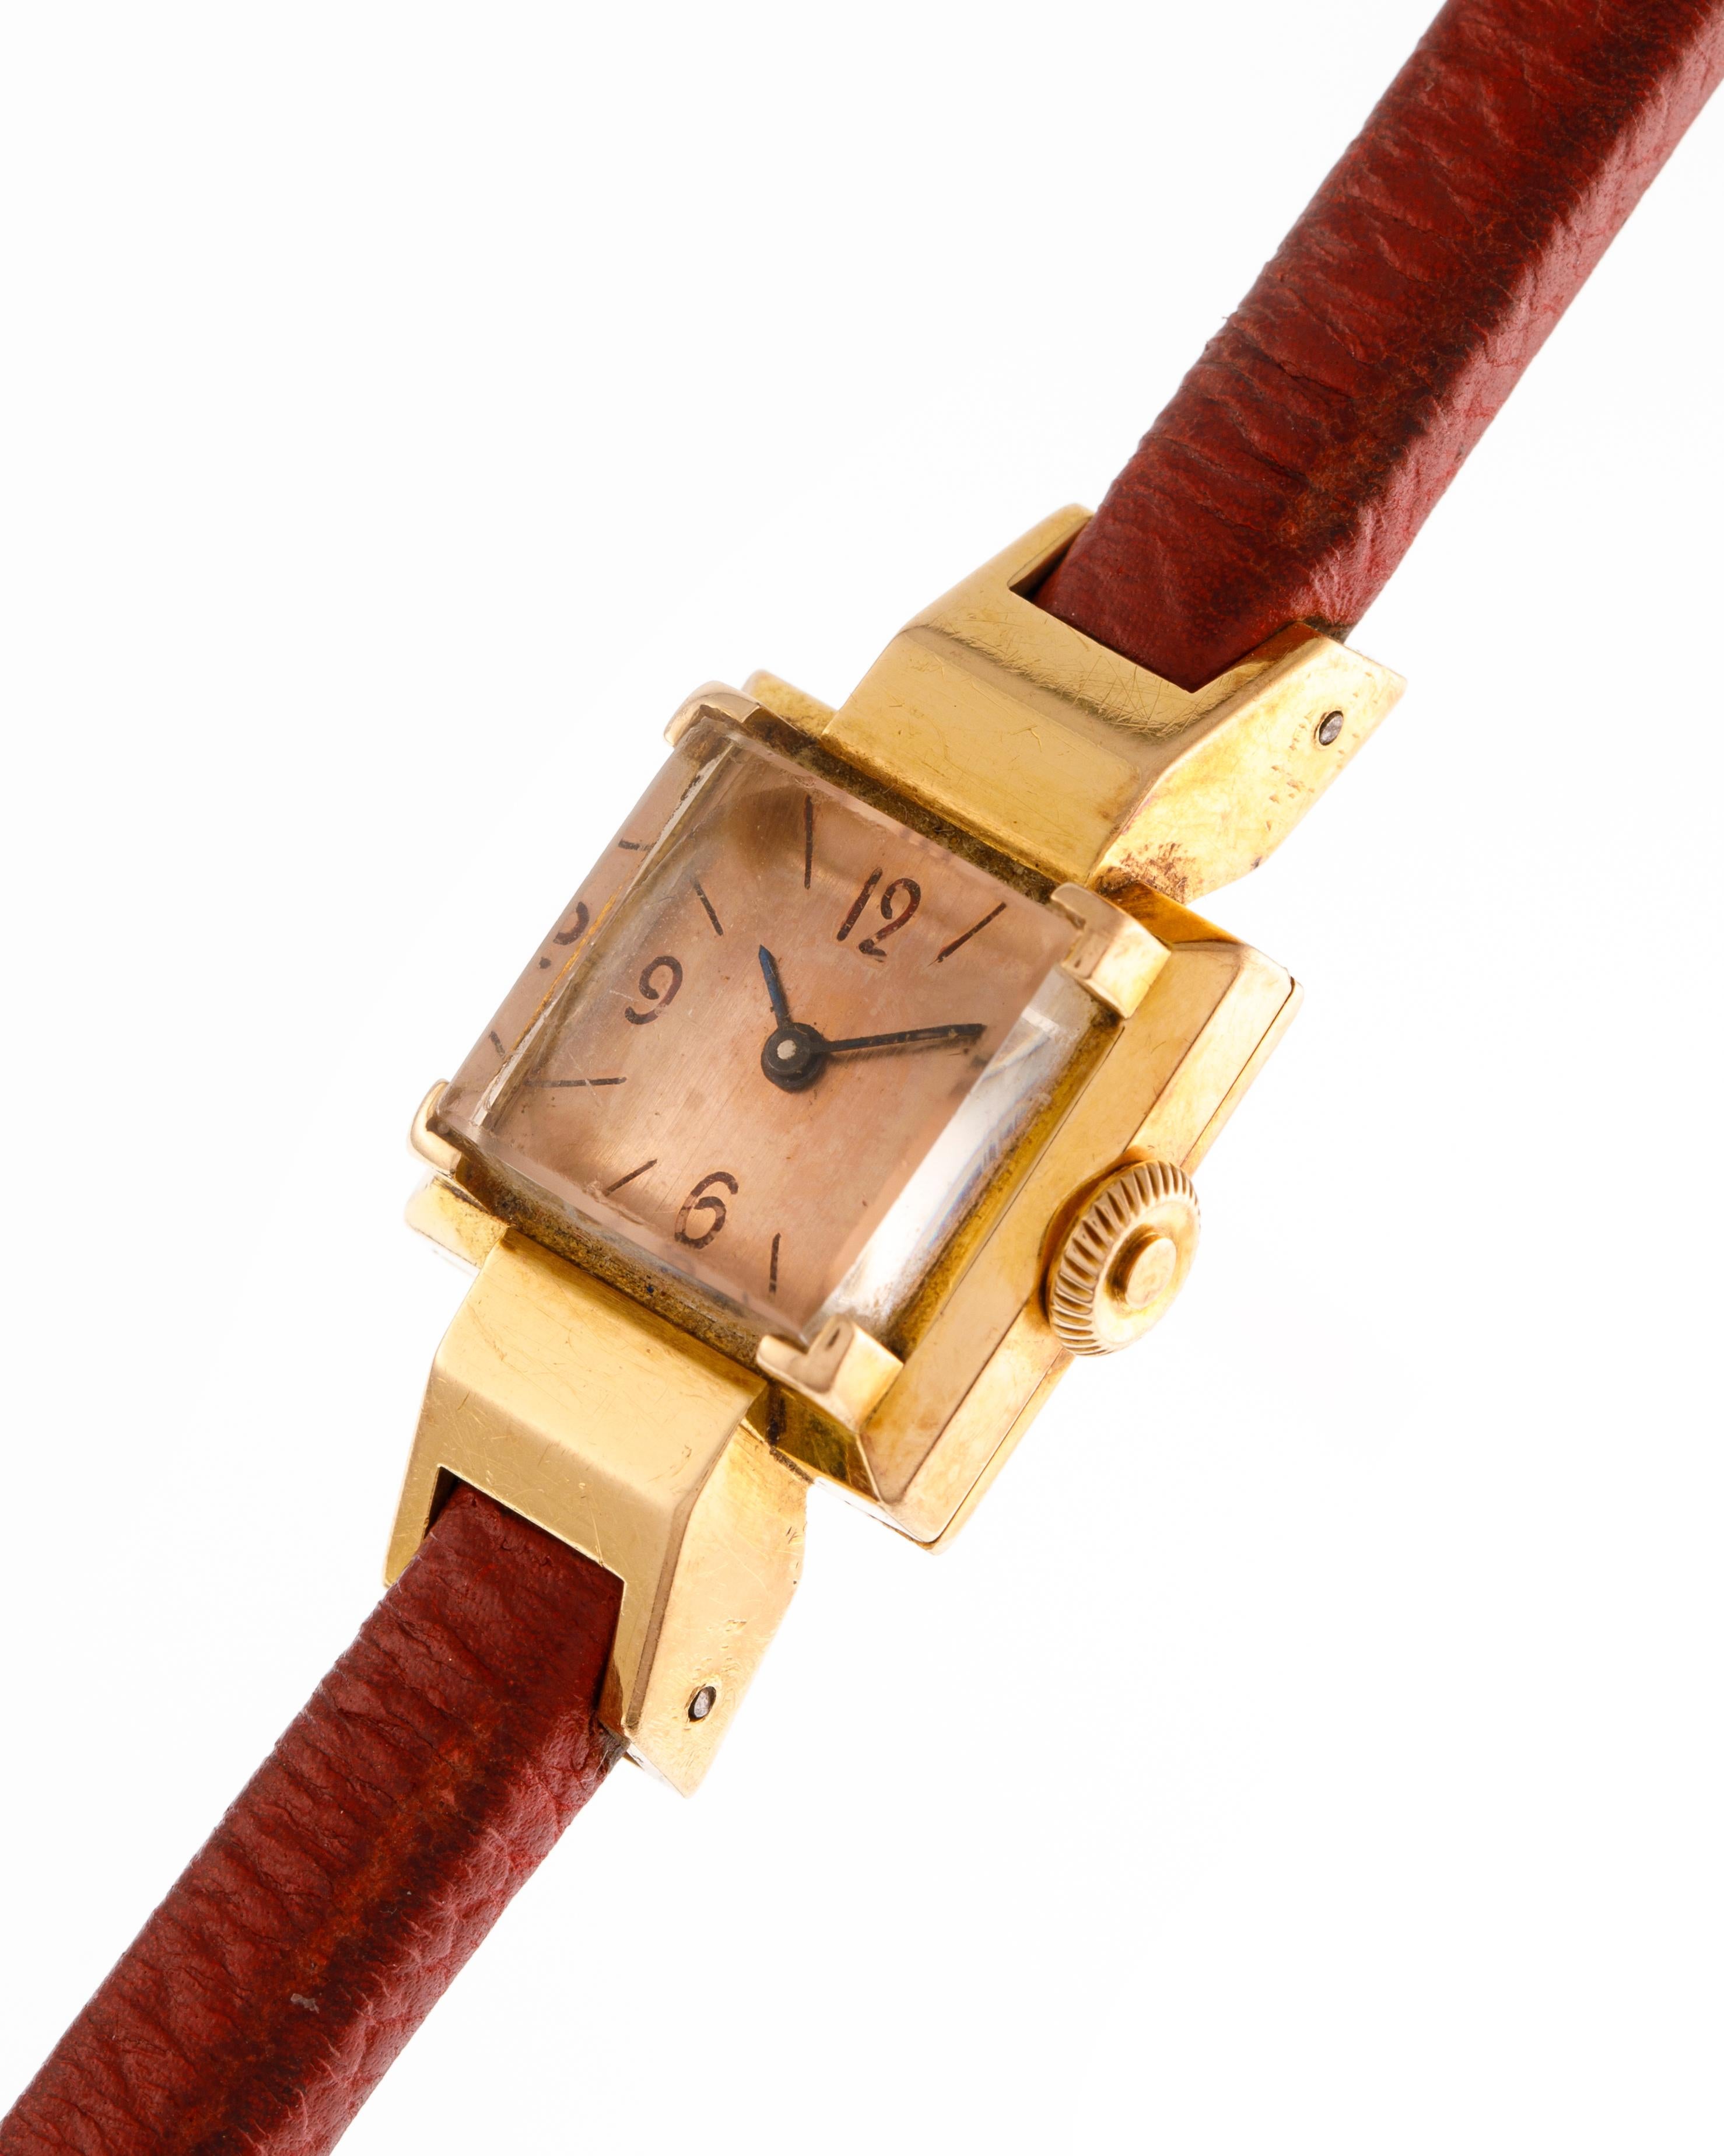 Universal Genève Retailed by Hermès Wrist Watch 18 Carat Yellow Gold In Good Condition For Sale In Milan, IT